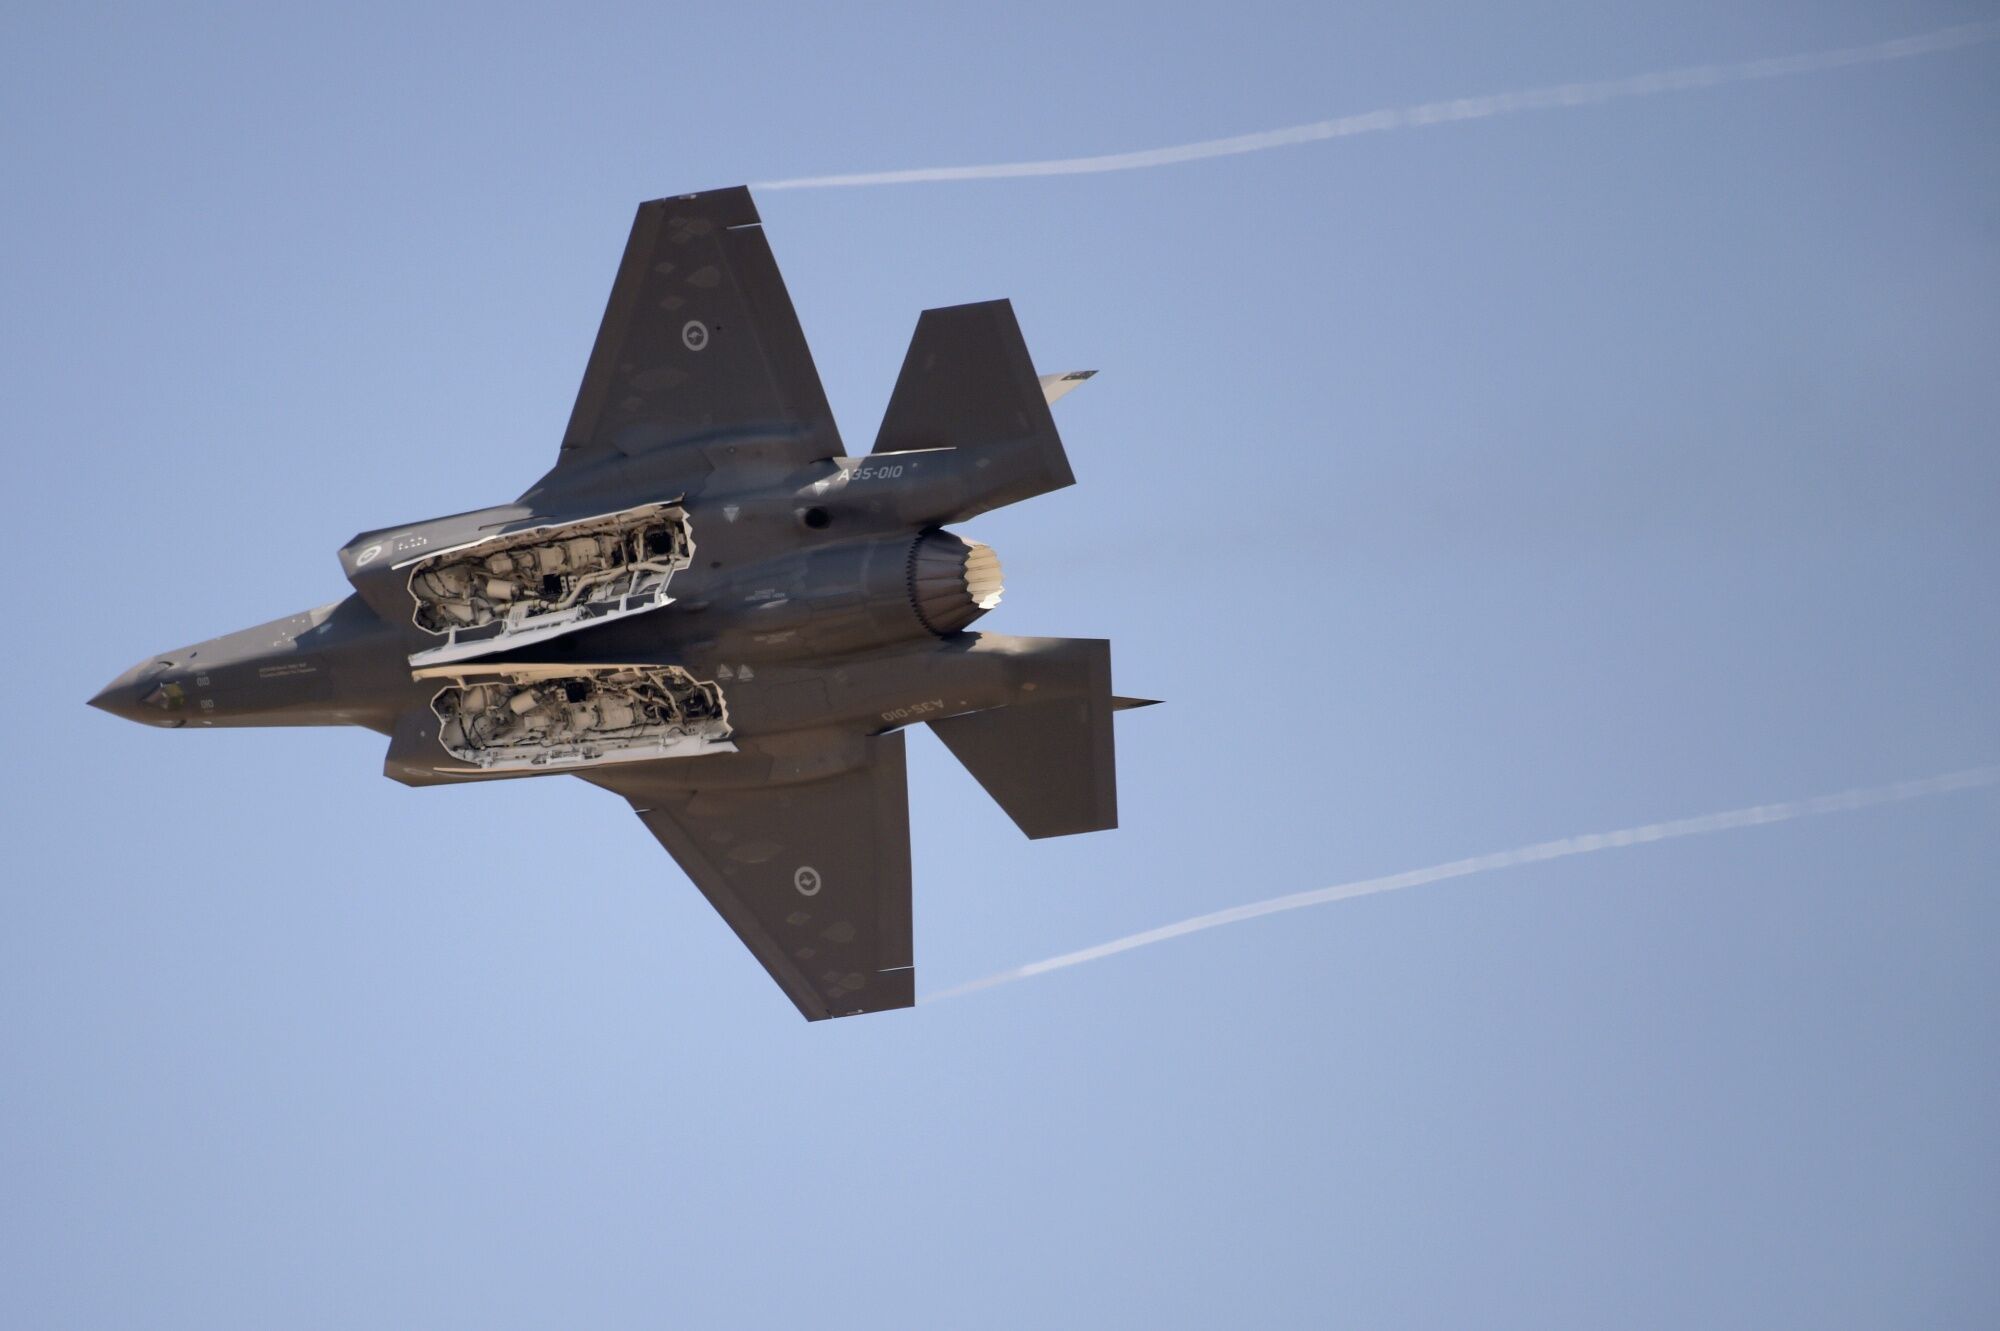 cost of sustaining lockheed’s f-35 jet now forecast to exceed $1.5 trillion